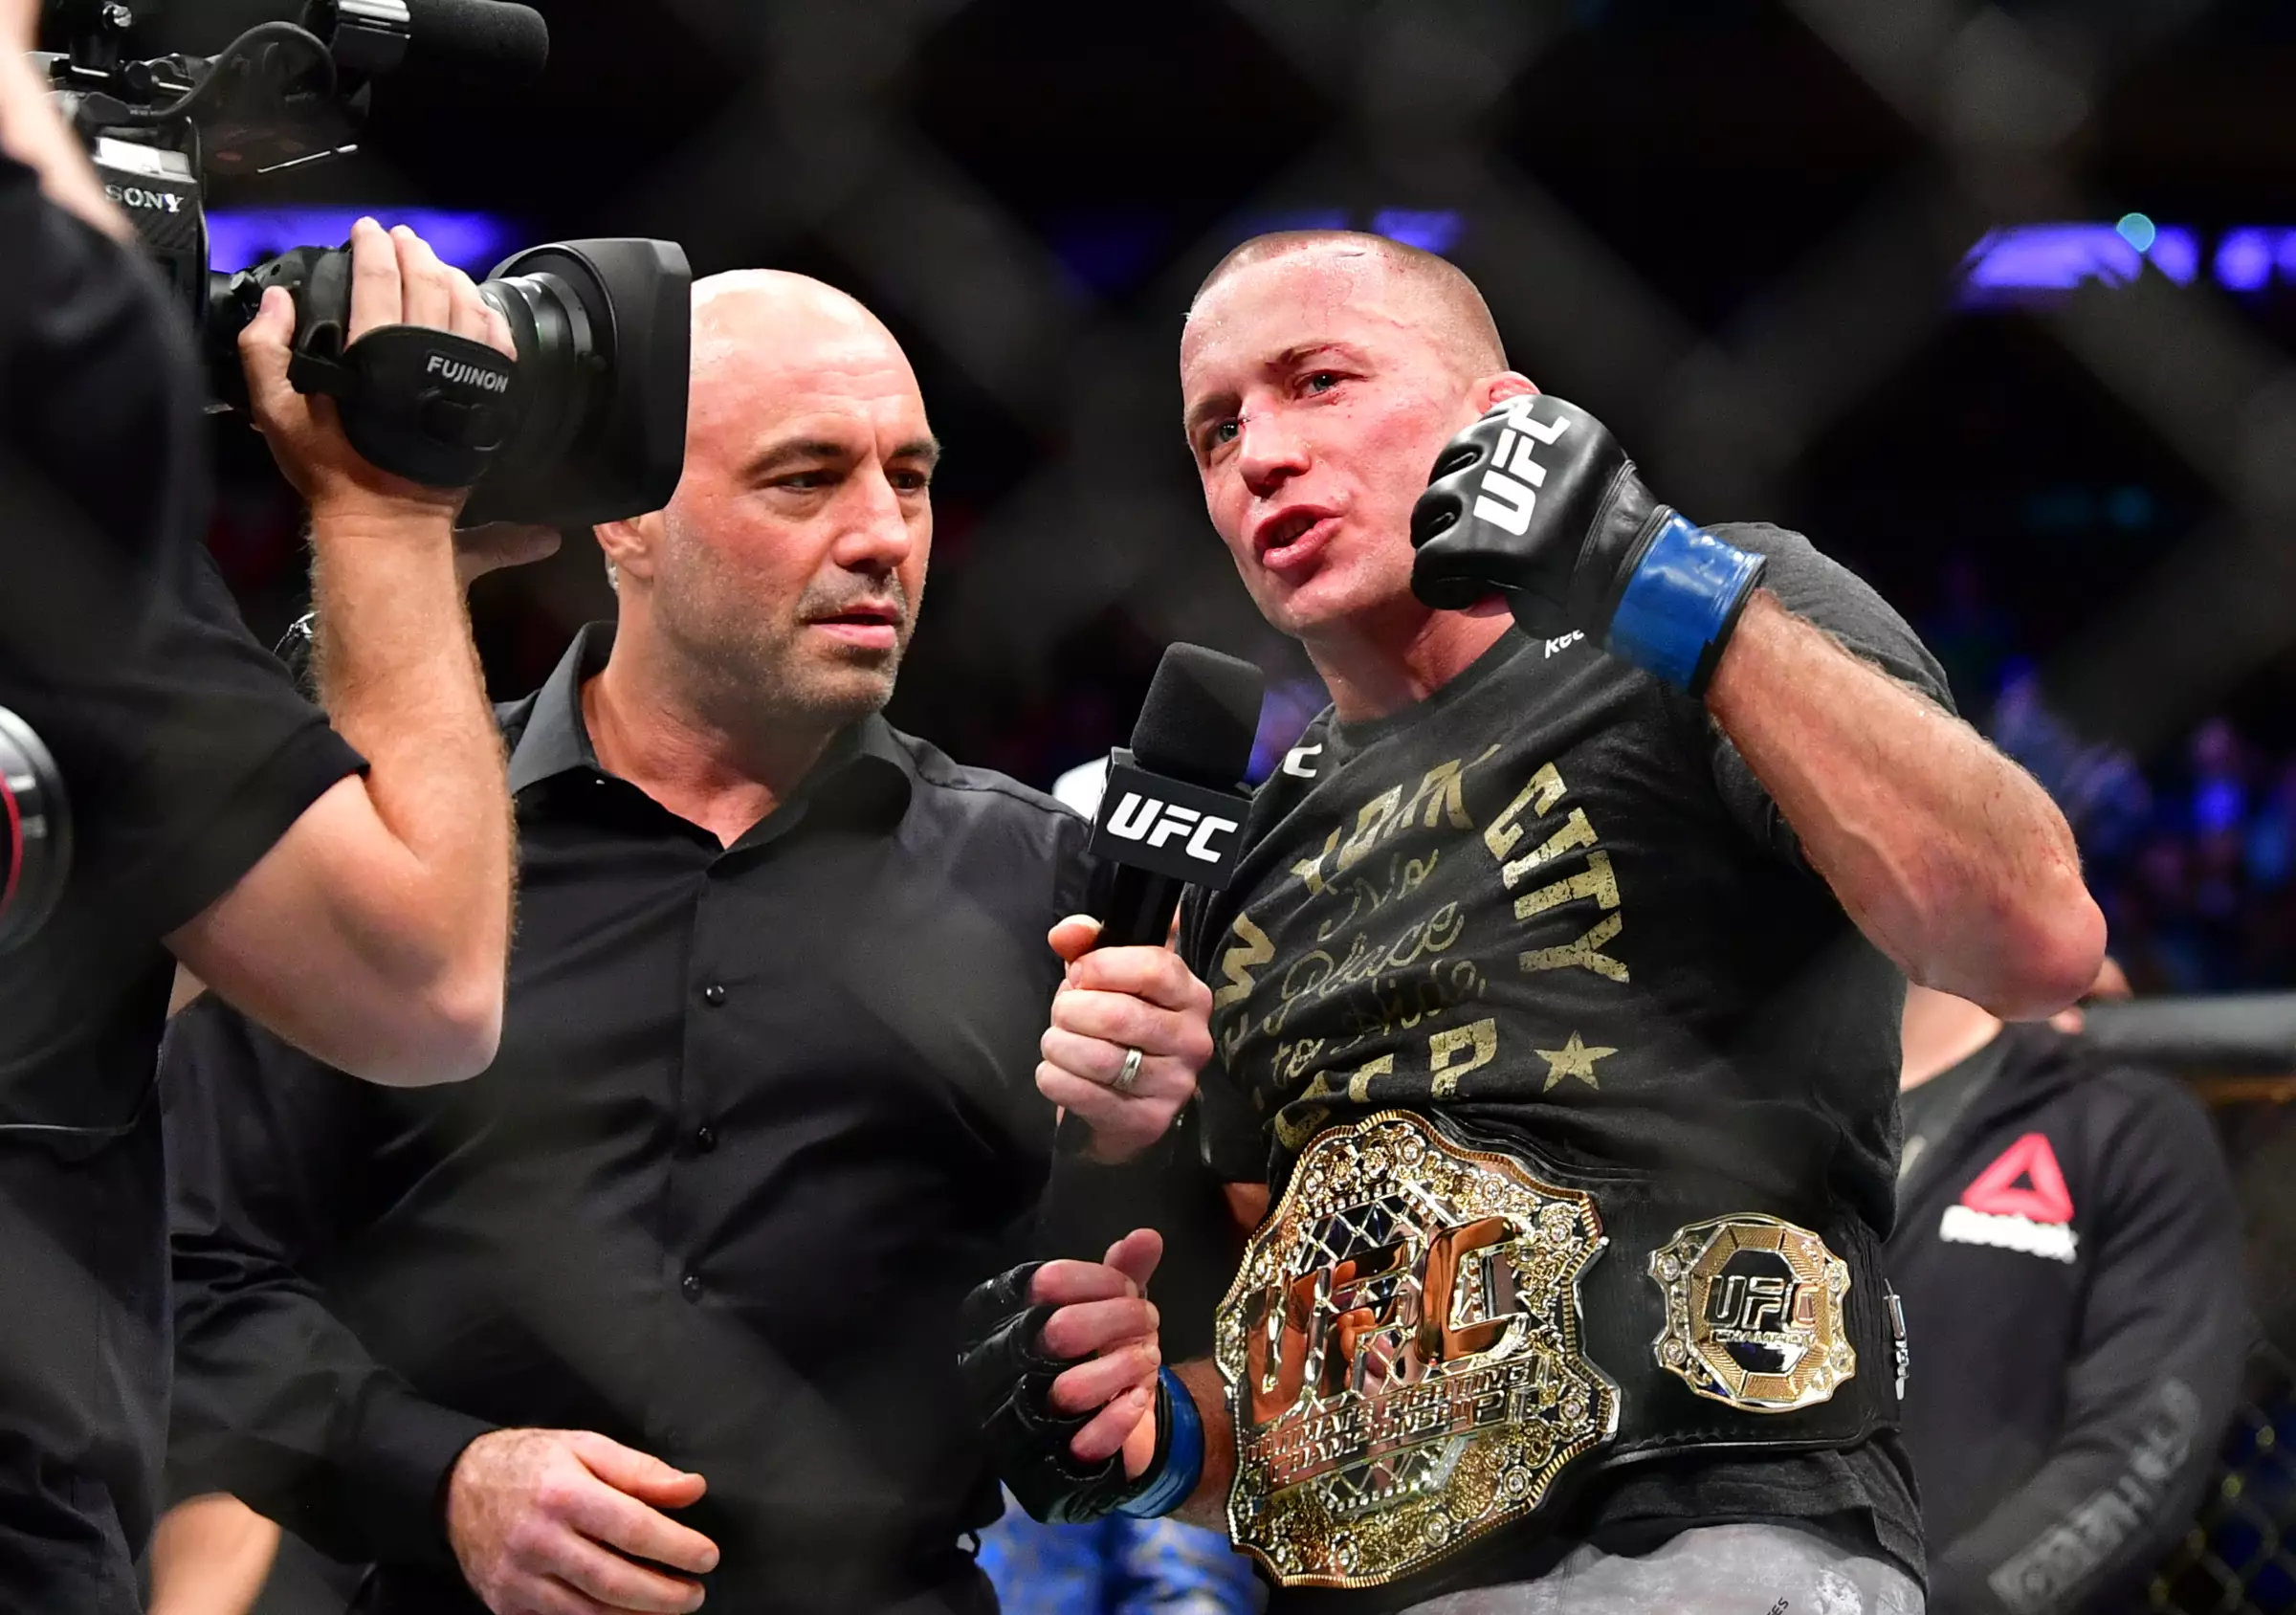 Georges St-Pierre beat everybody he fought, avenging two defeats on the way